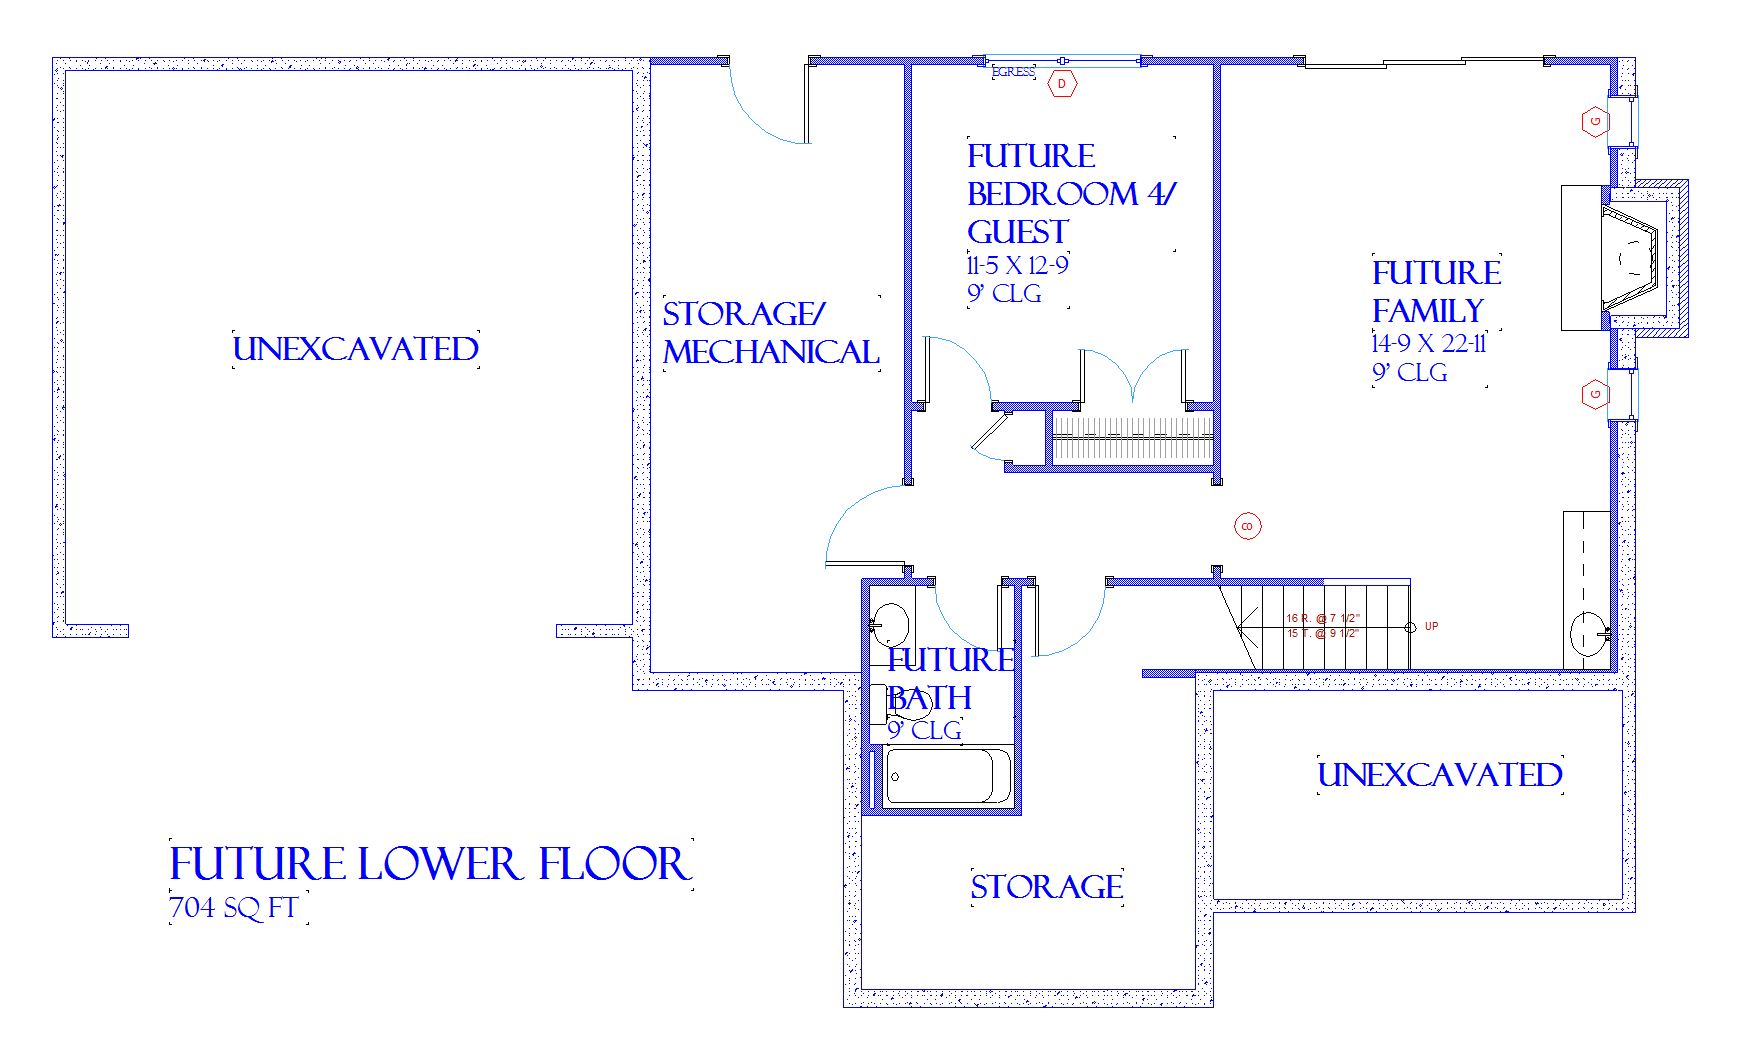 Oceana - Home Design and Floor Plan - SketchPad House Plans